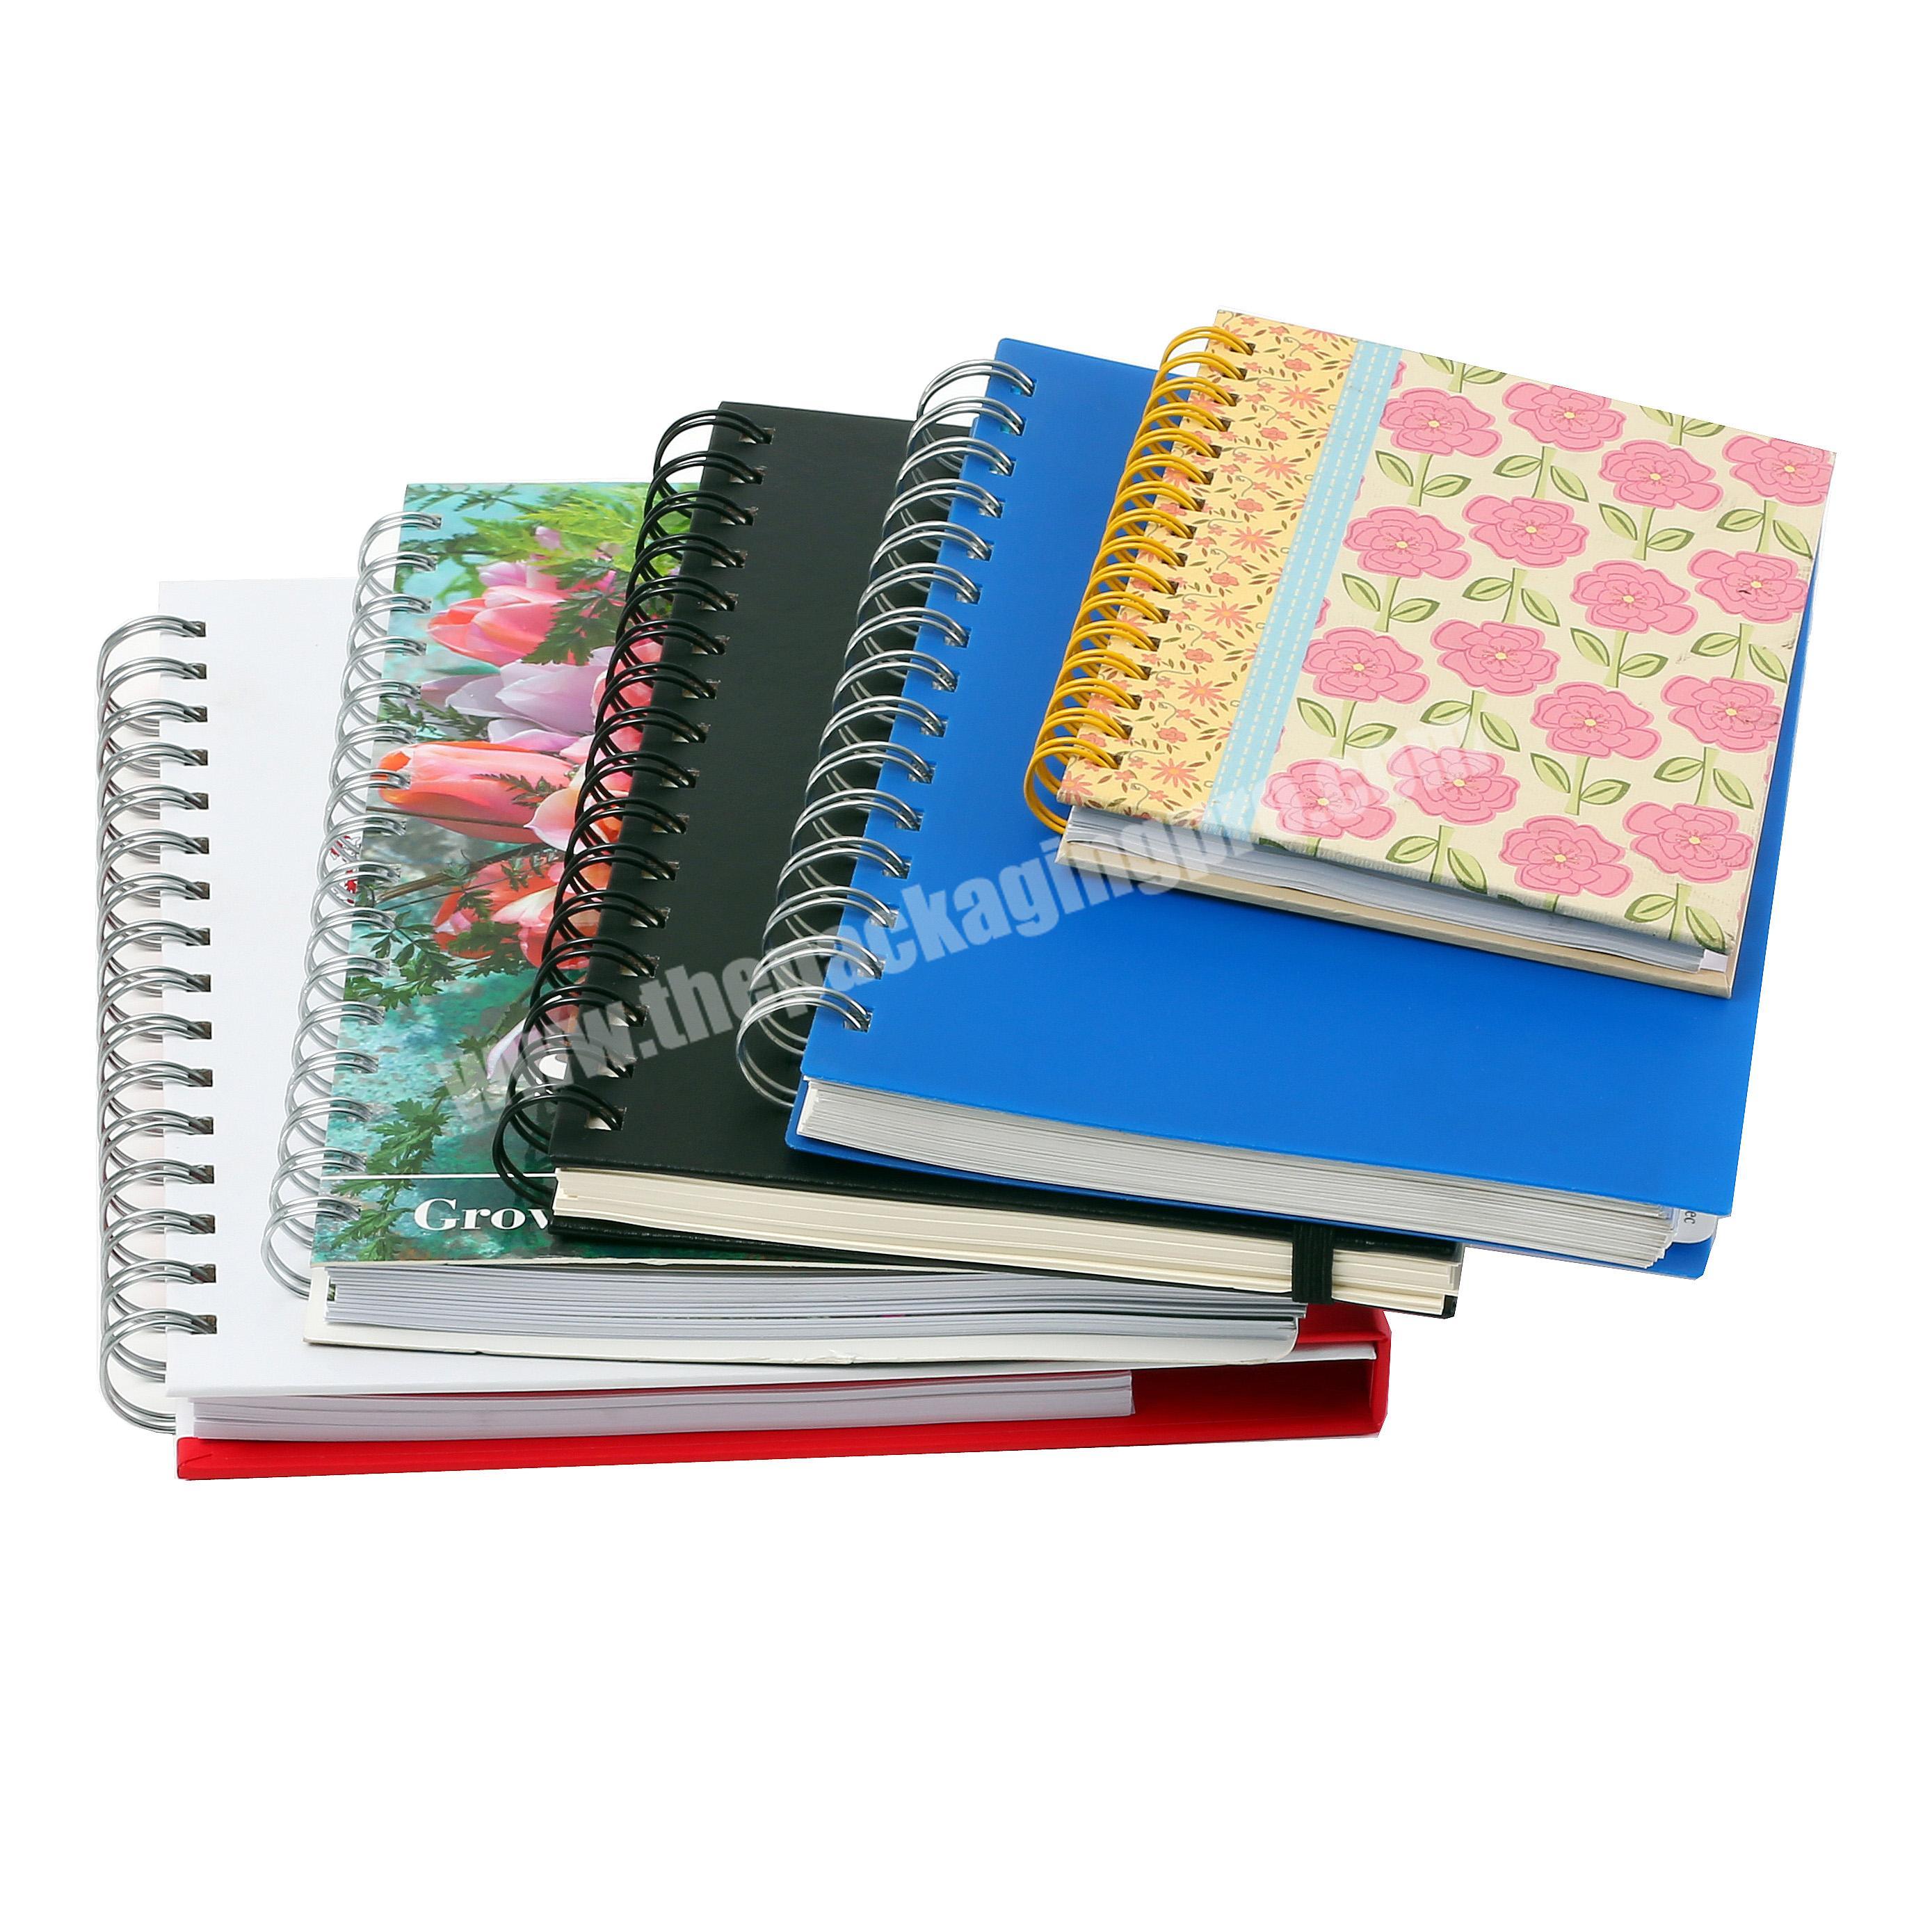 Printed hardcover spiral custom notebook with different styles